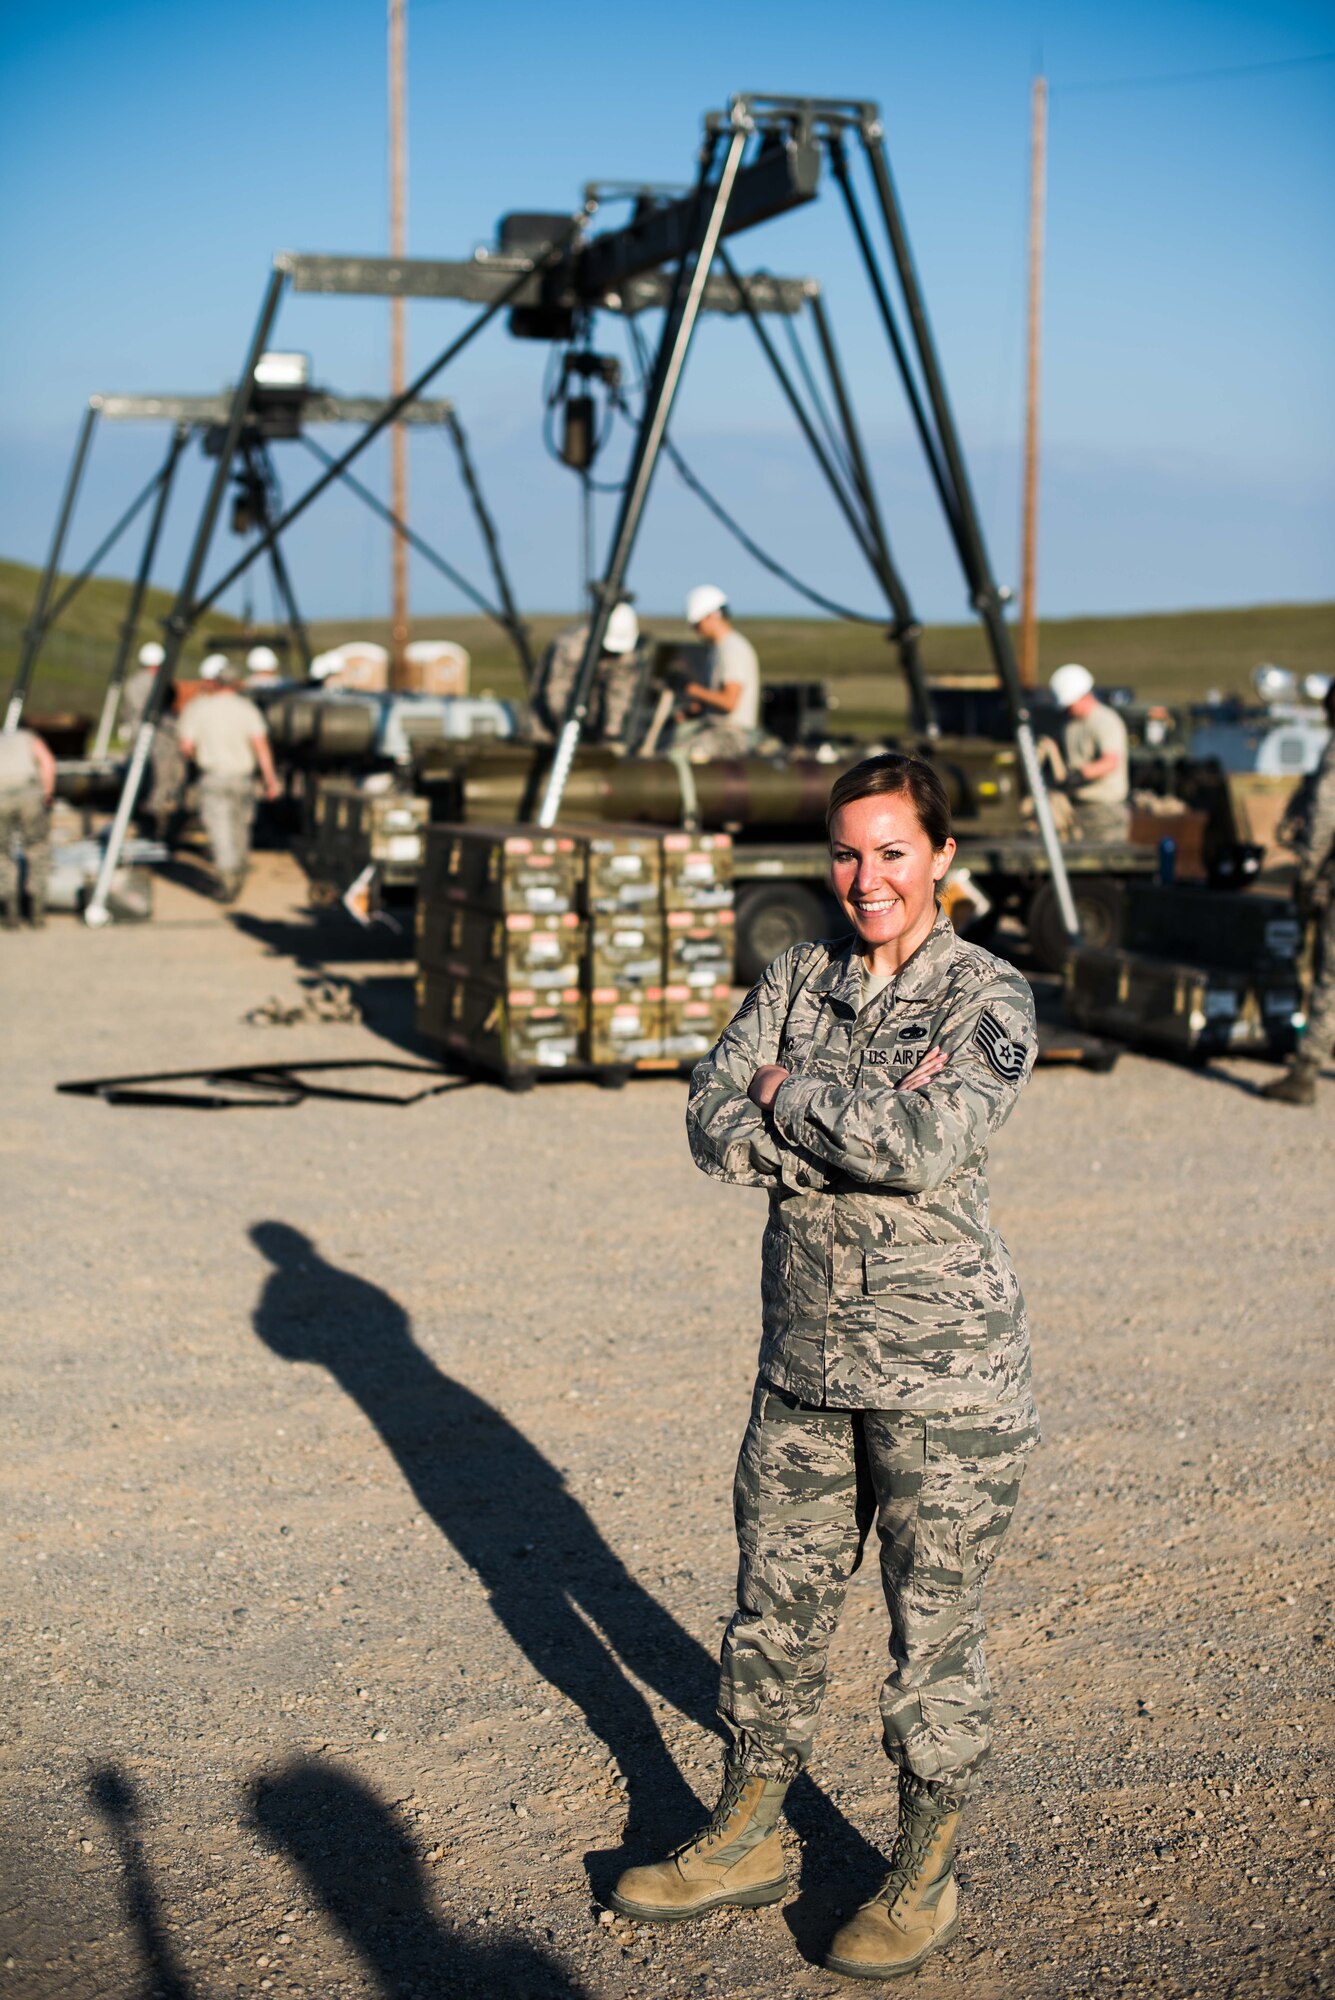 Tech. Sgt. Ashley Long, 9th Munitions Squadron Air Force Combat Ammunition Center combat adviser, poses for a photo at Beale Air Force Base, California, March 12, 2018. The portrait was used in a series that highlighted women for Women's History Month. (U.S. Air Force photo by Senior Airman Justin Parsons)